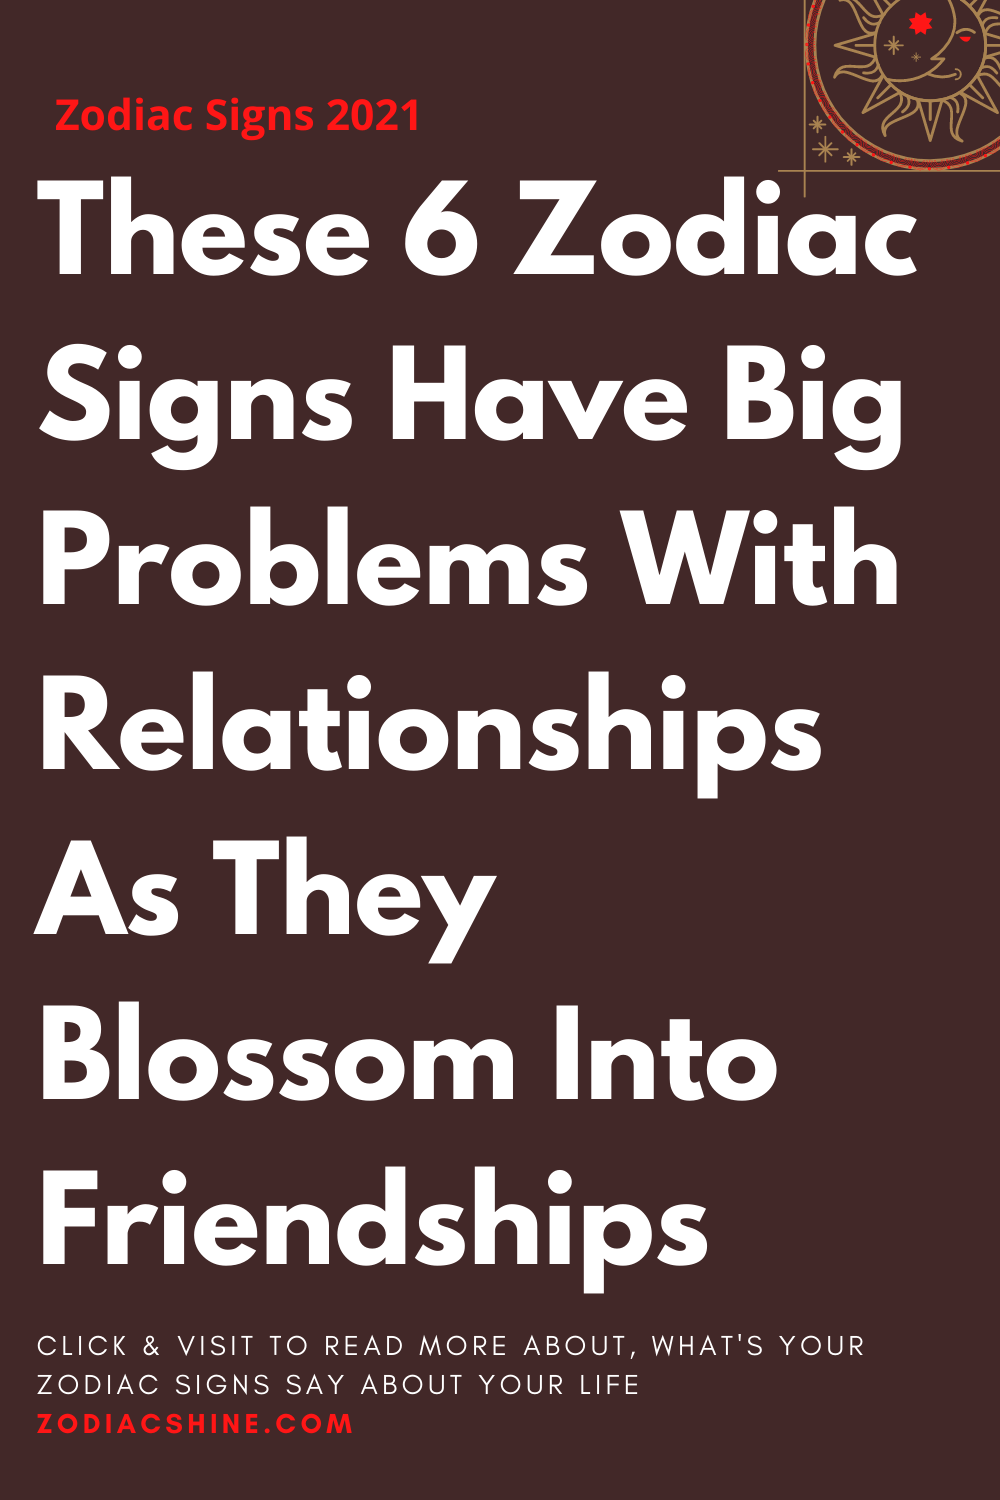 These 6 Zodiac Signs Have Big Problems With Relationships As They Blossom Into Friendships